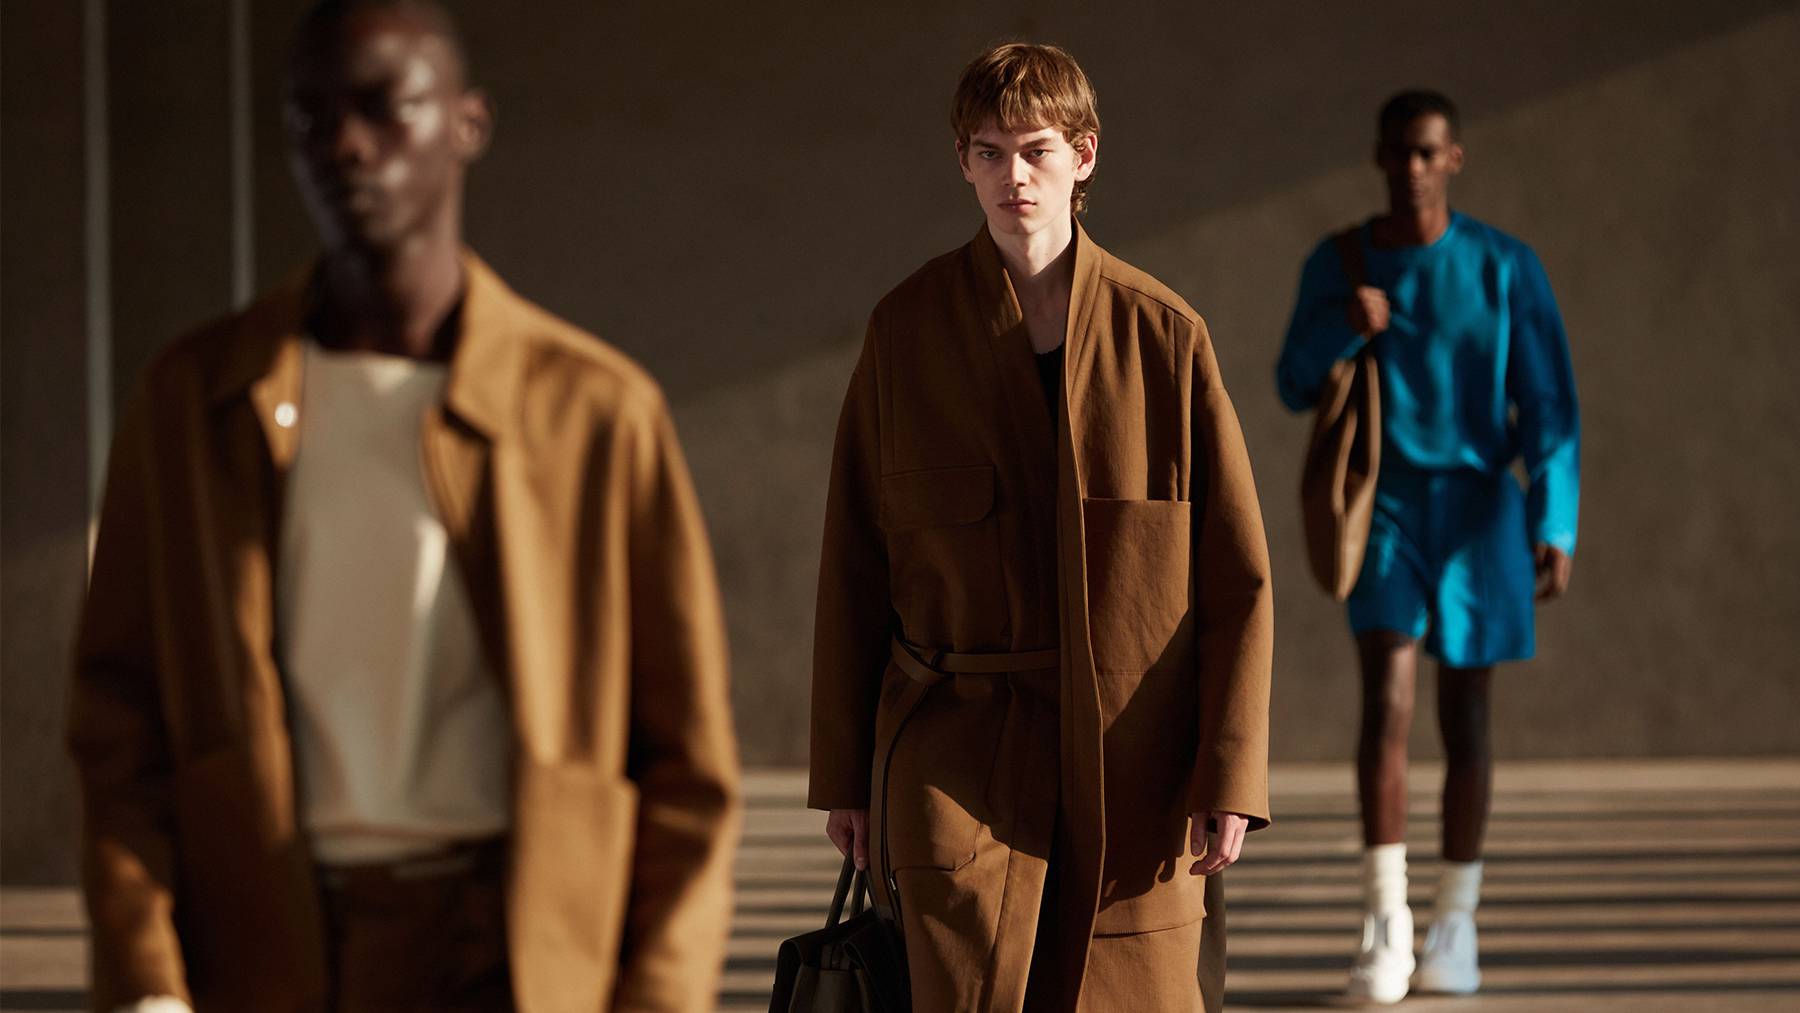 Ermenegildo Zegna is set to go public by combining with a New York-listed special purpose acquisition company (SPAC) in a deal that values the Italian luxury company at $3.2 billion.